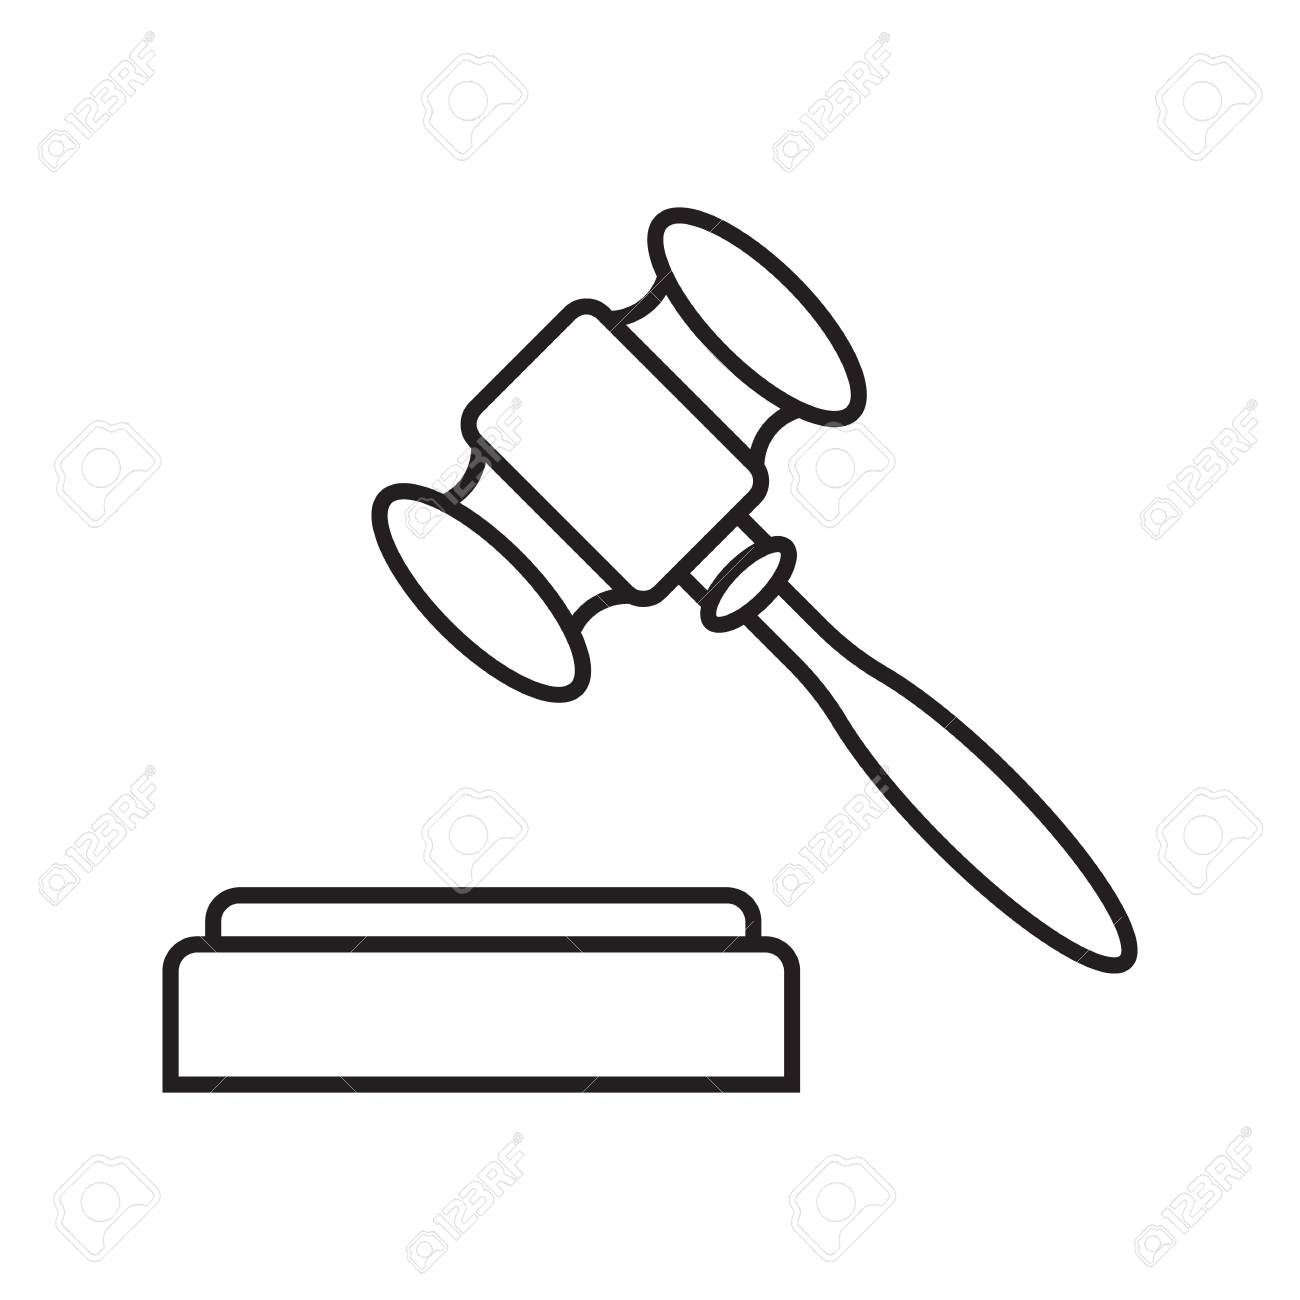 Gavel drawing clipart images gallery for free download